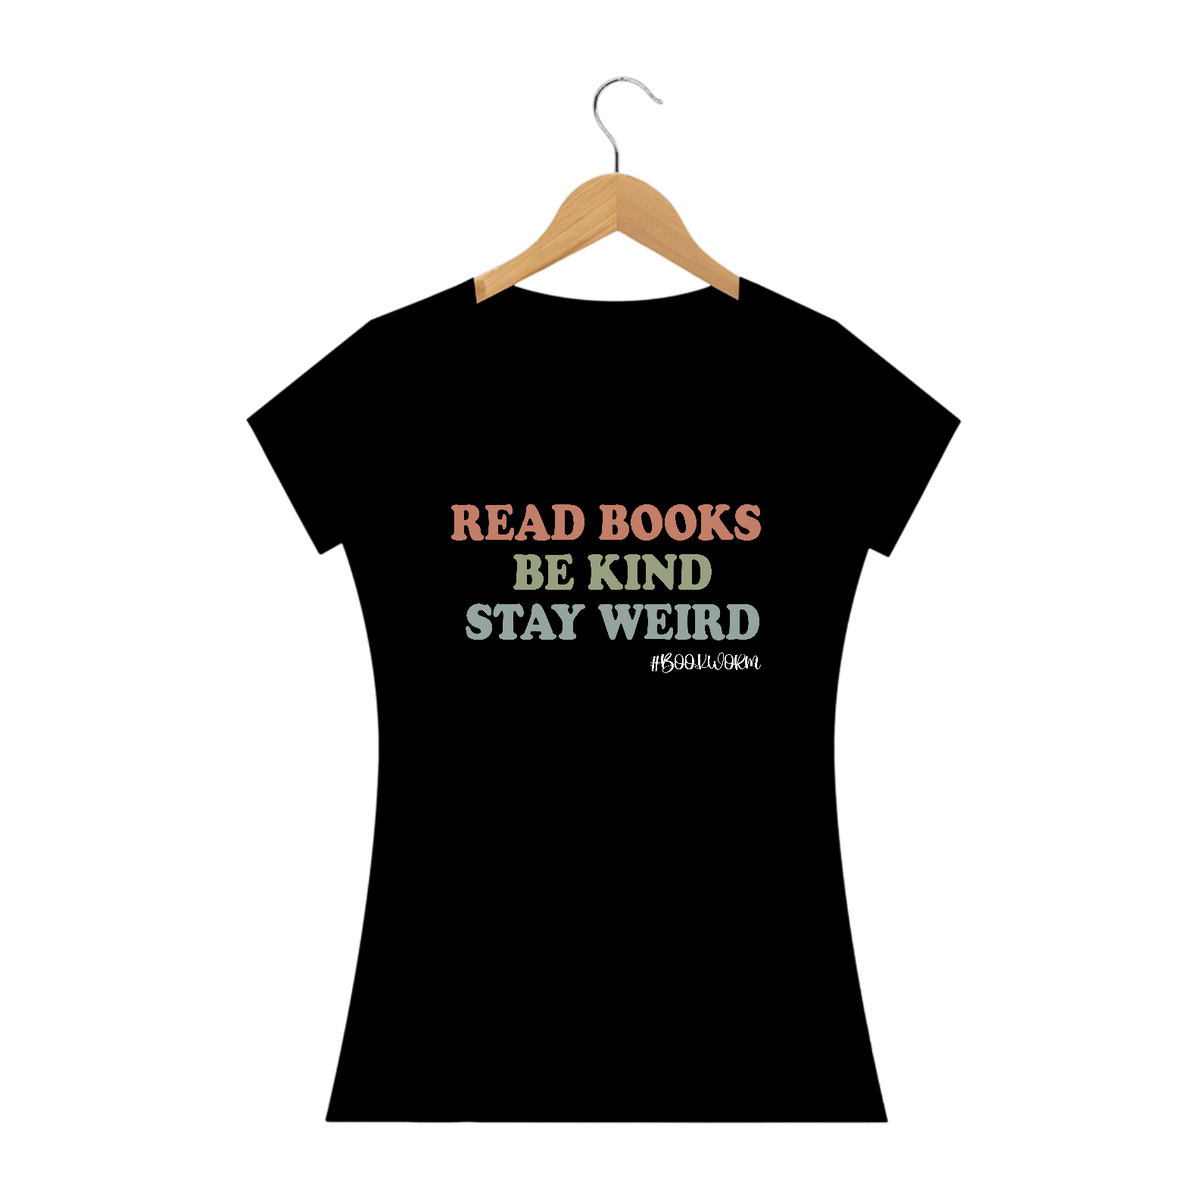 Nome do produto: Baby Long Read Books Be Kind Stay Weird